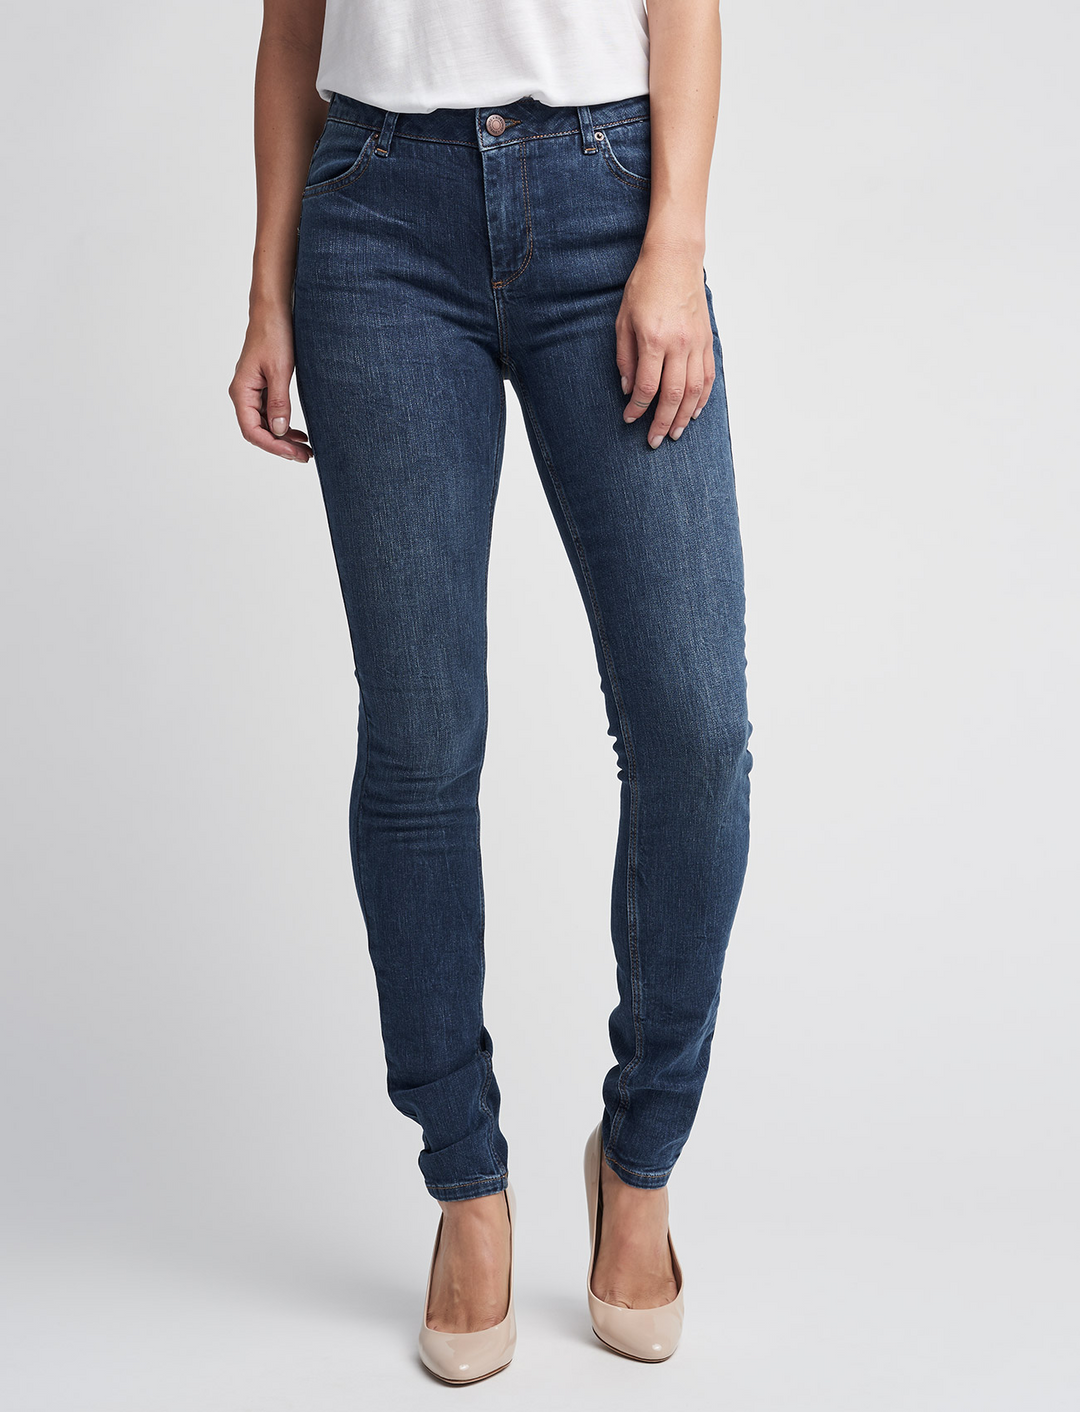 Penelope 342 Adore jeans